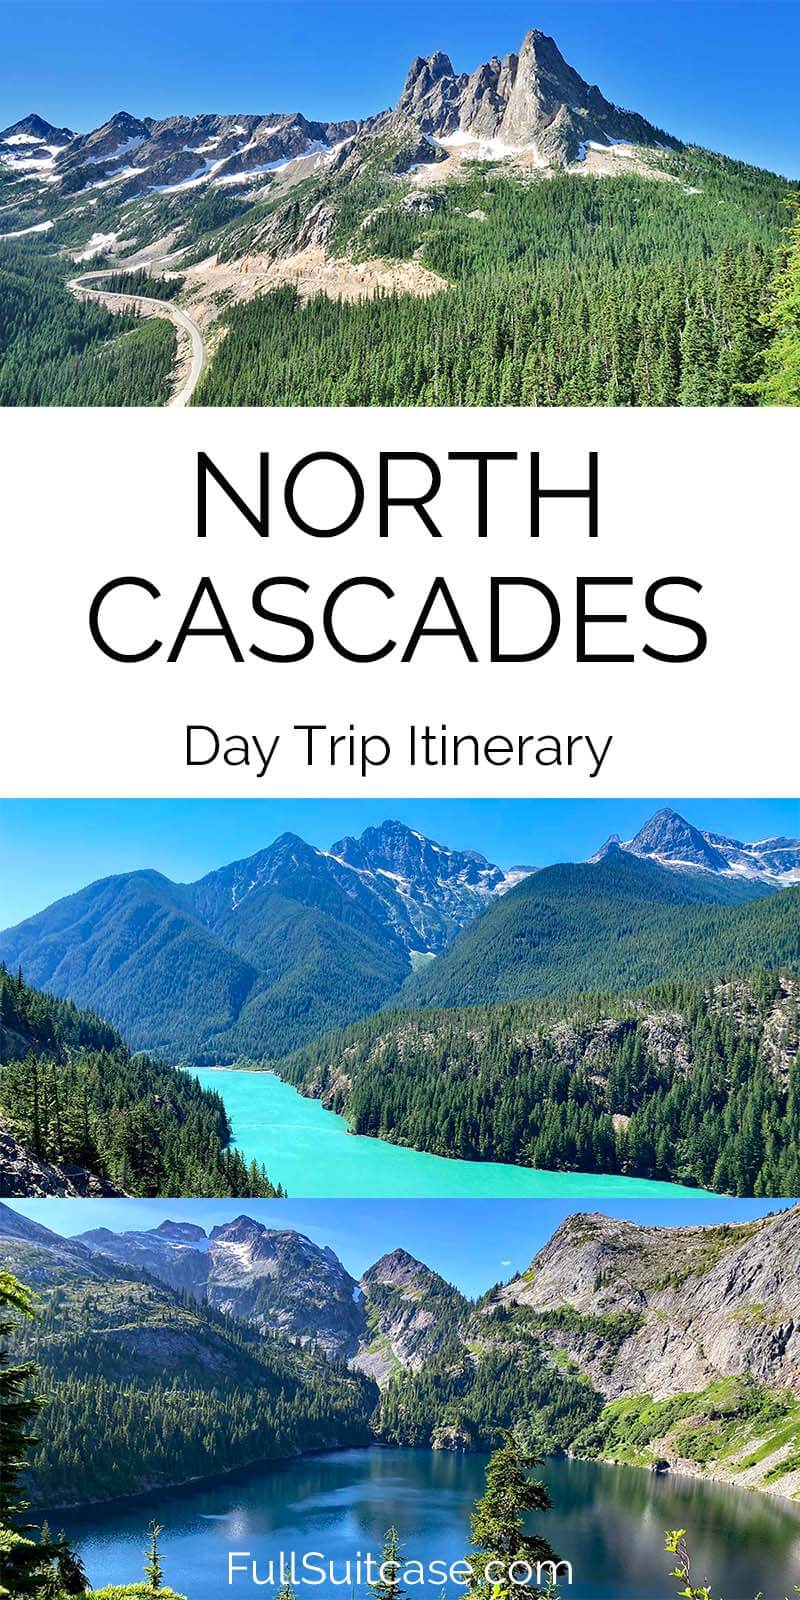 North Cascades day trip itinerary from Seattle